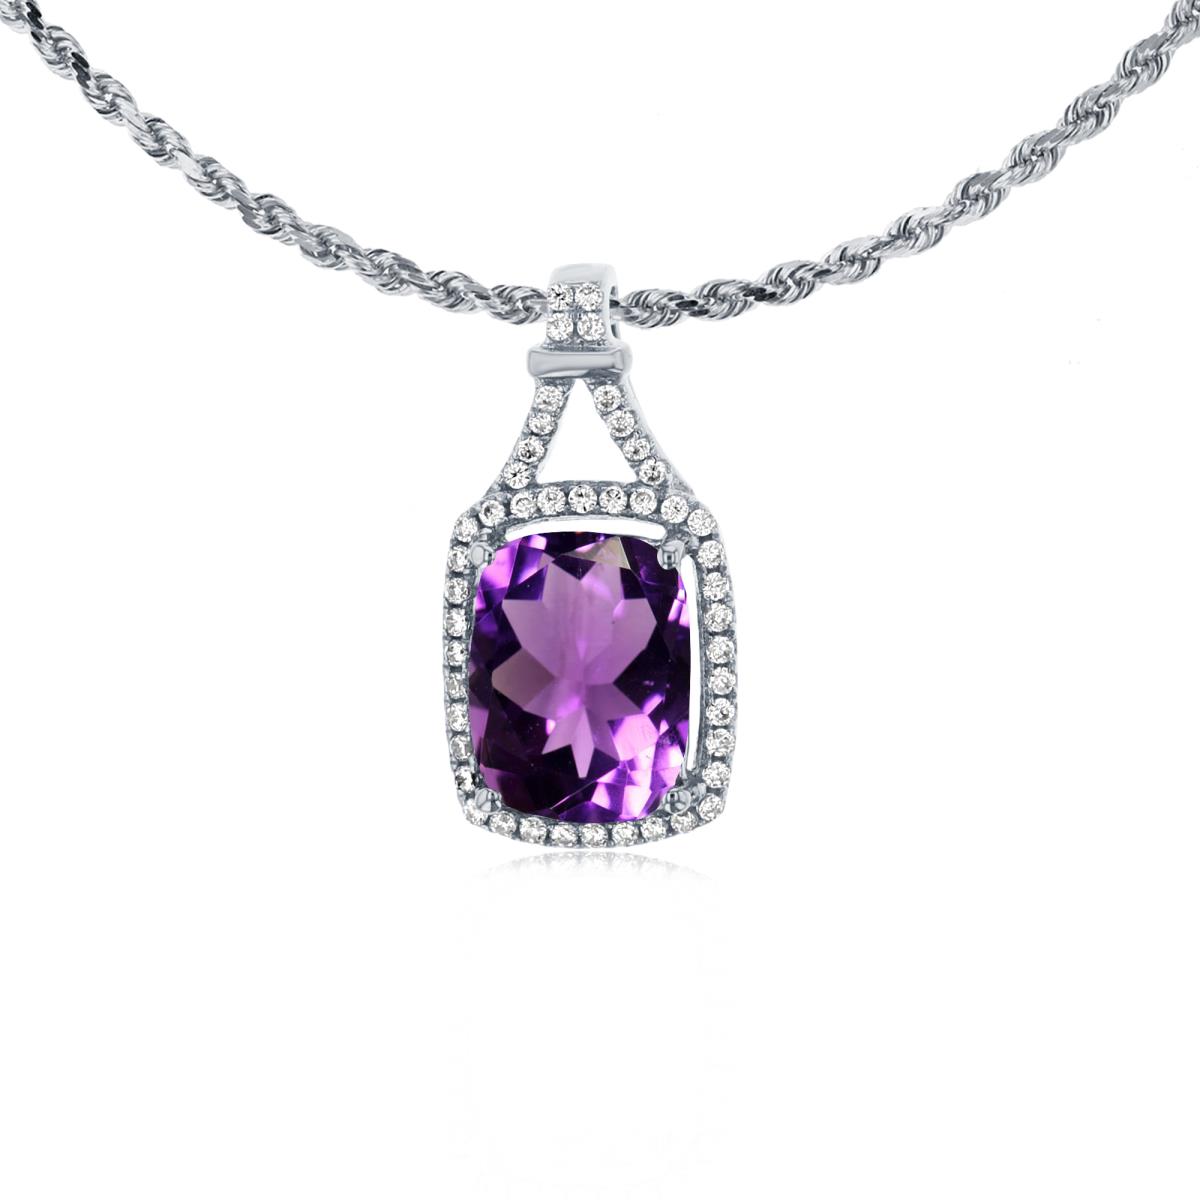 14K White Gold 8x6mm Cushion Amethyst & 0.13 CTTW Rd Diamonds Halo 18" Rope Chain Necklace